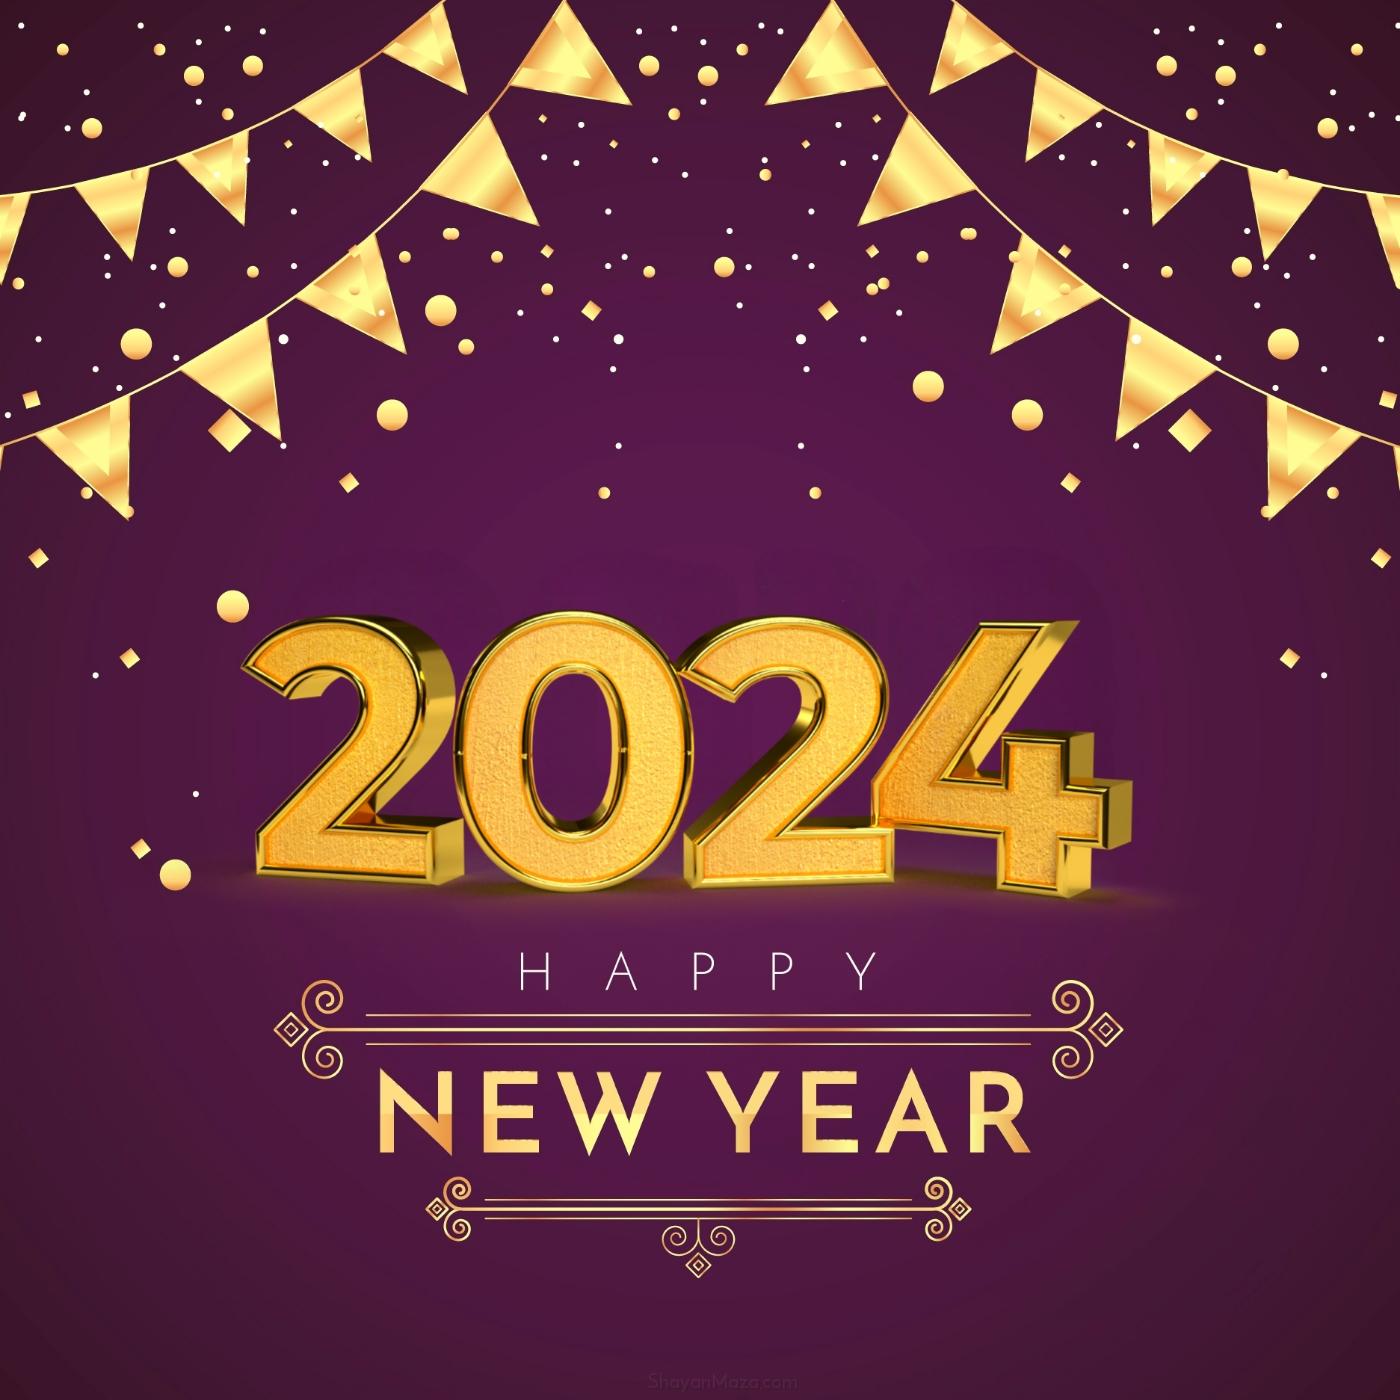 Free Happy New Year 2024 Images Download